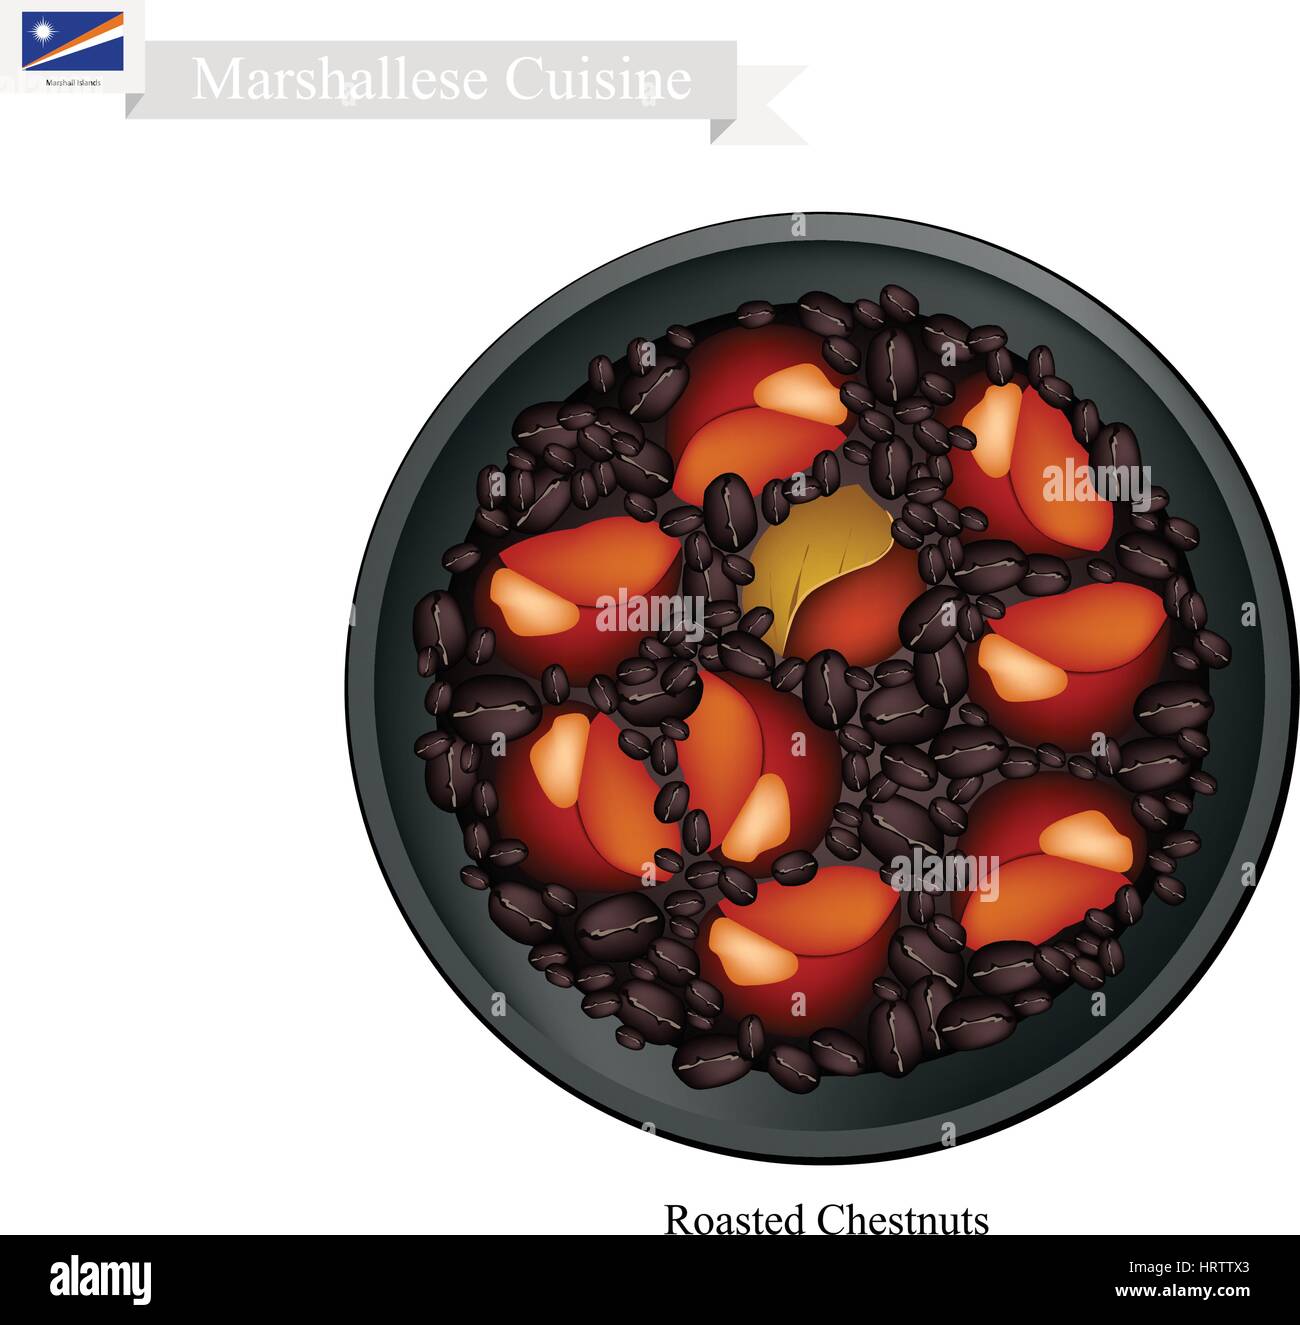 Marshallese Cuisine, Illustration of Traditional Roasting Chestnuts. A Popular Dish of Marshall Islands. Stock Vector